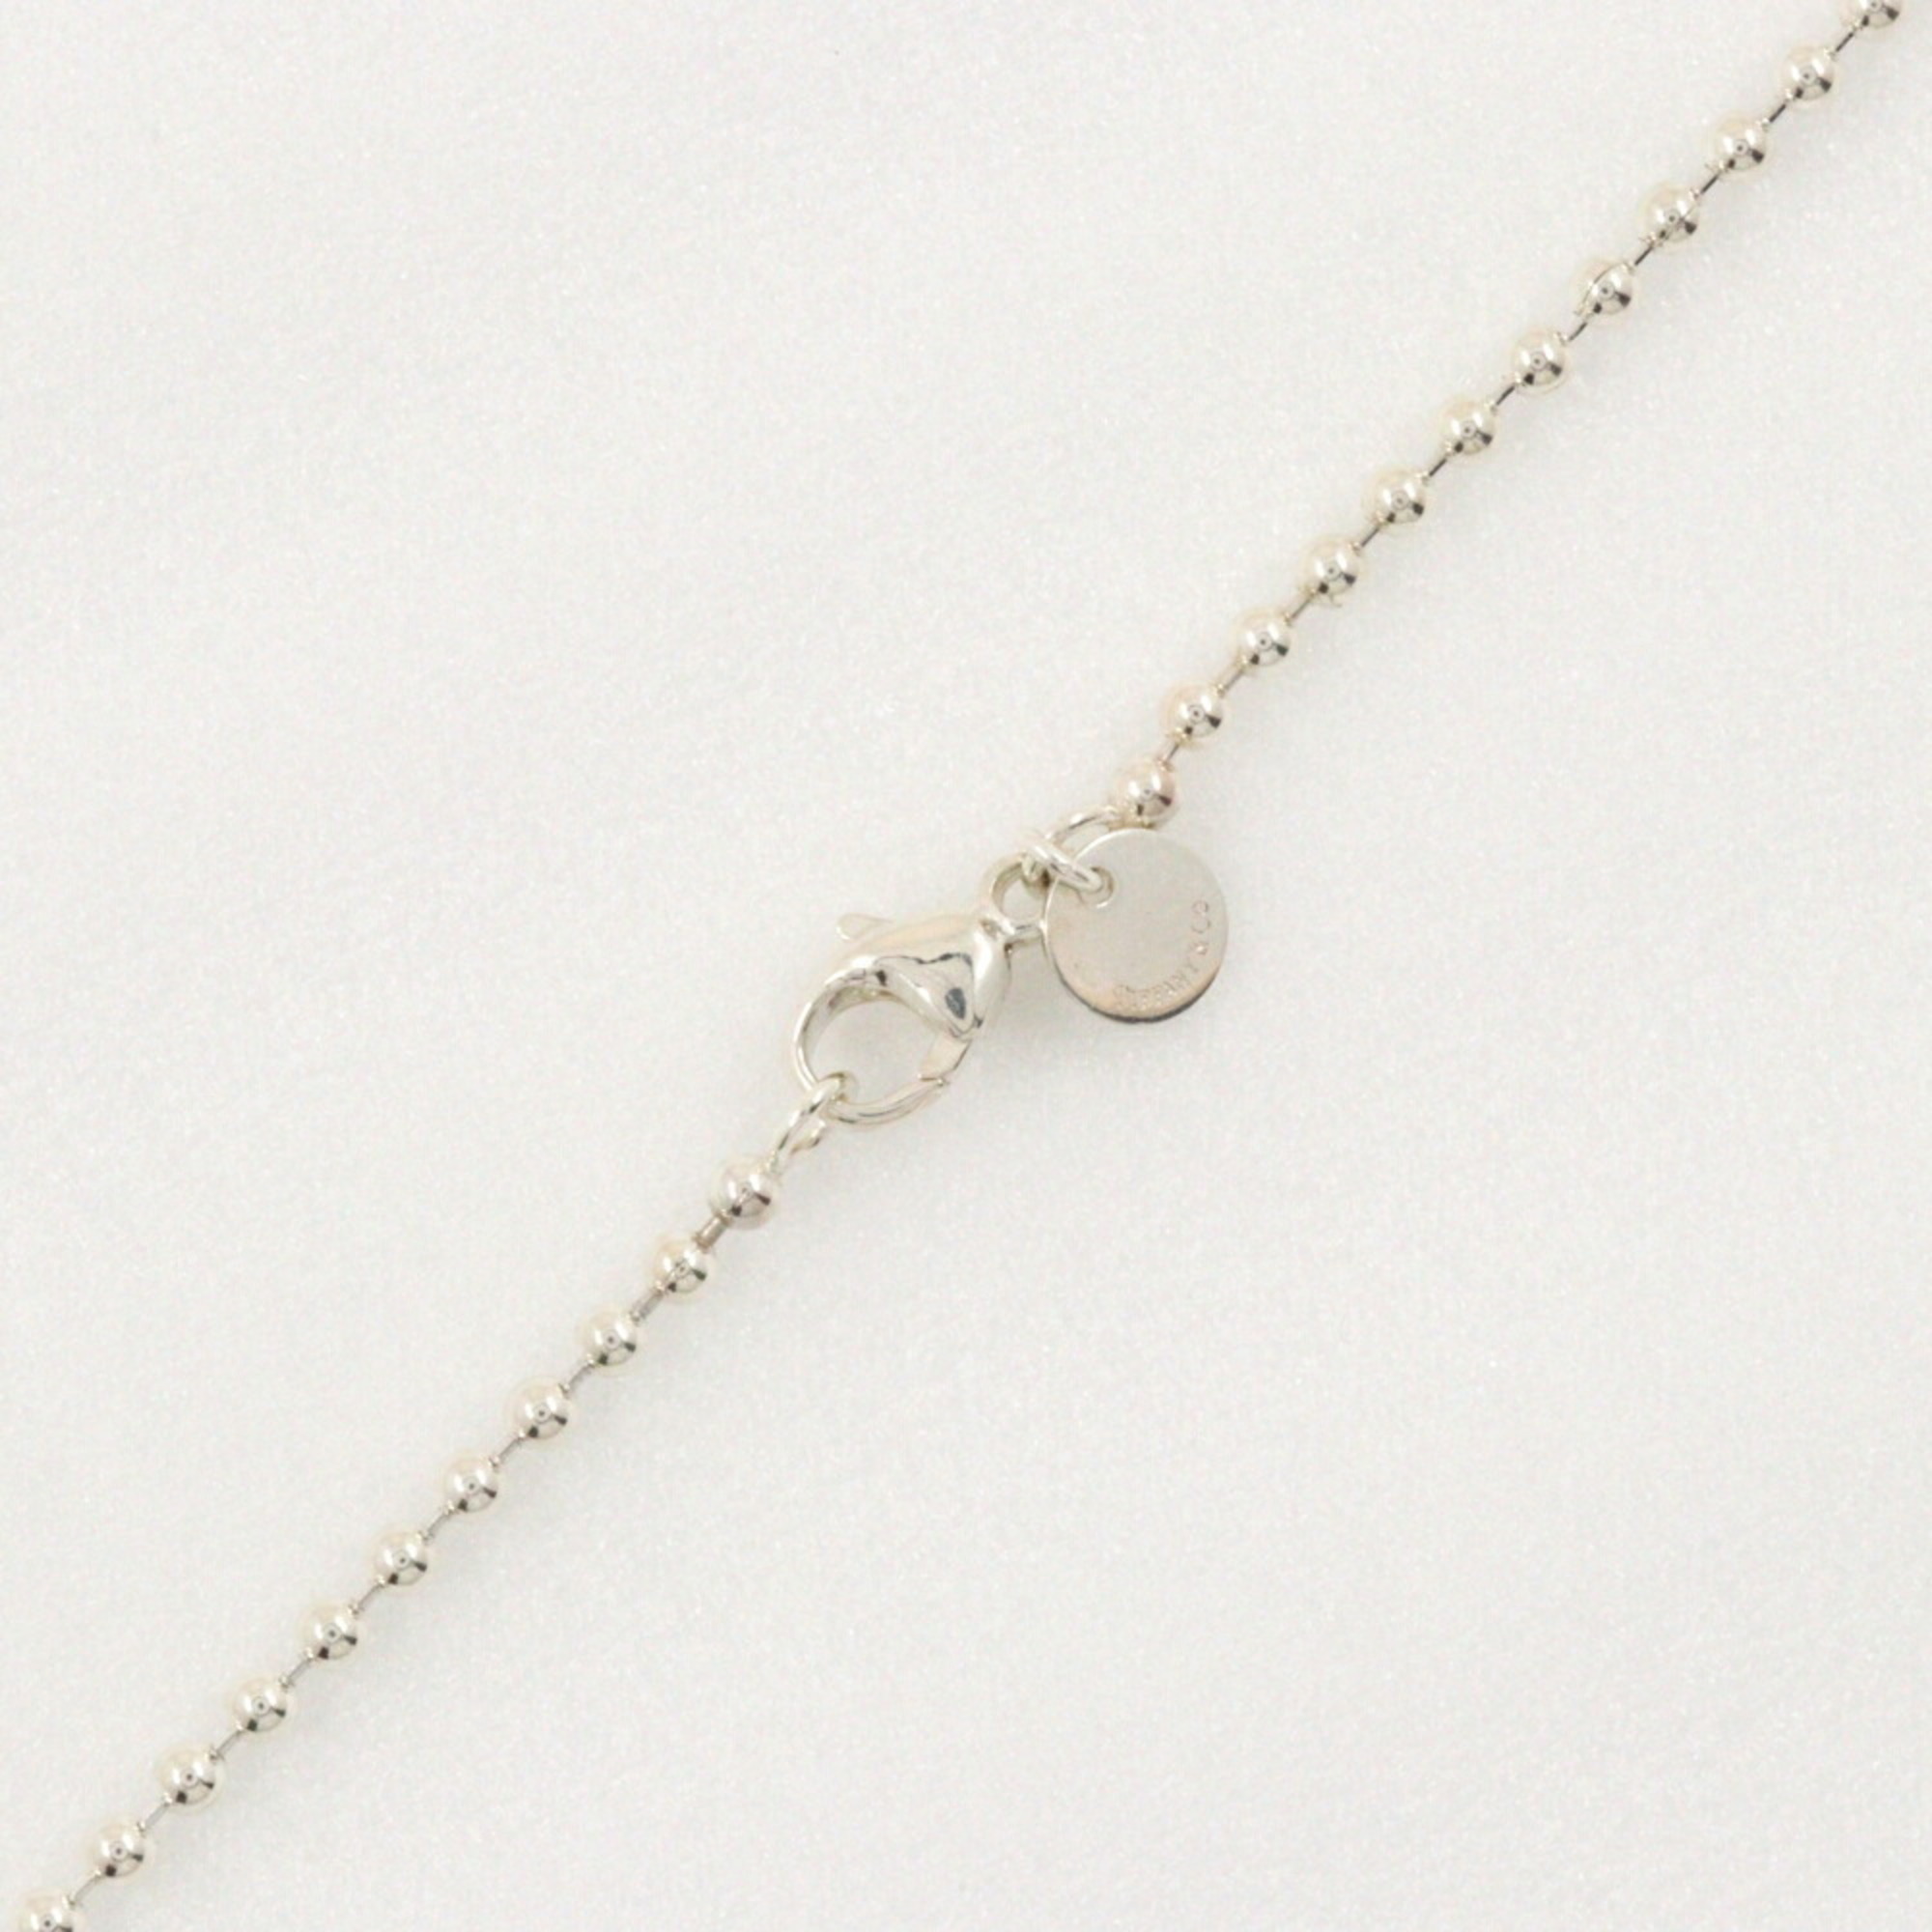 Tiffany & Co. Return to Necklace Heart Tag Ball Chain Silver 925 Made in USA M10113 Approx. 22.5g TIFFANY Women's